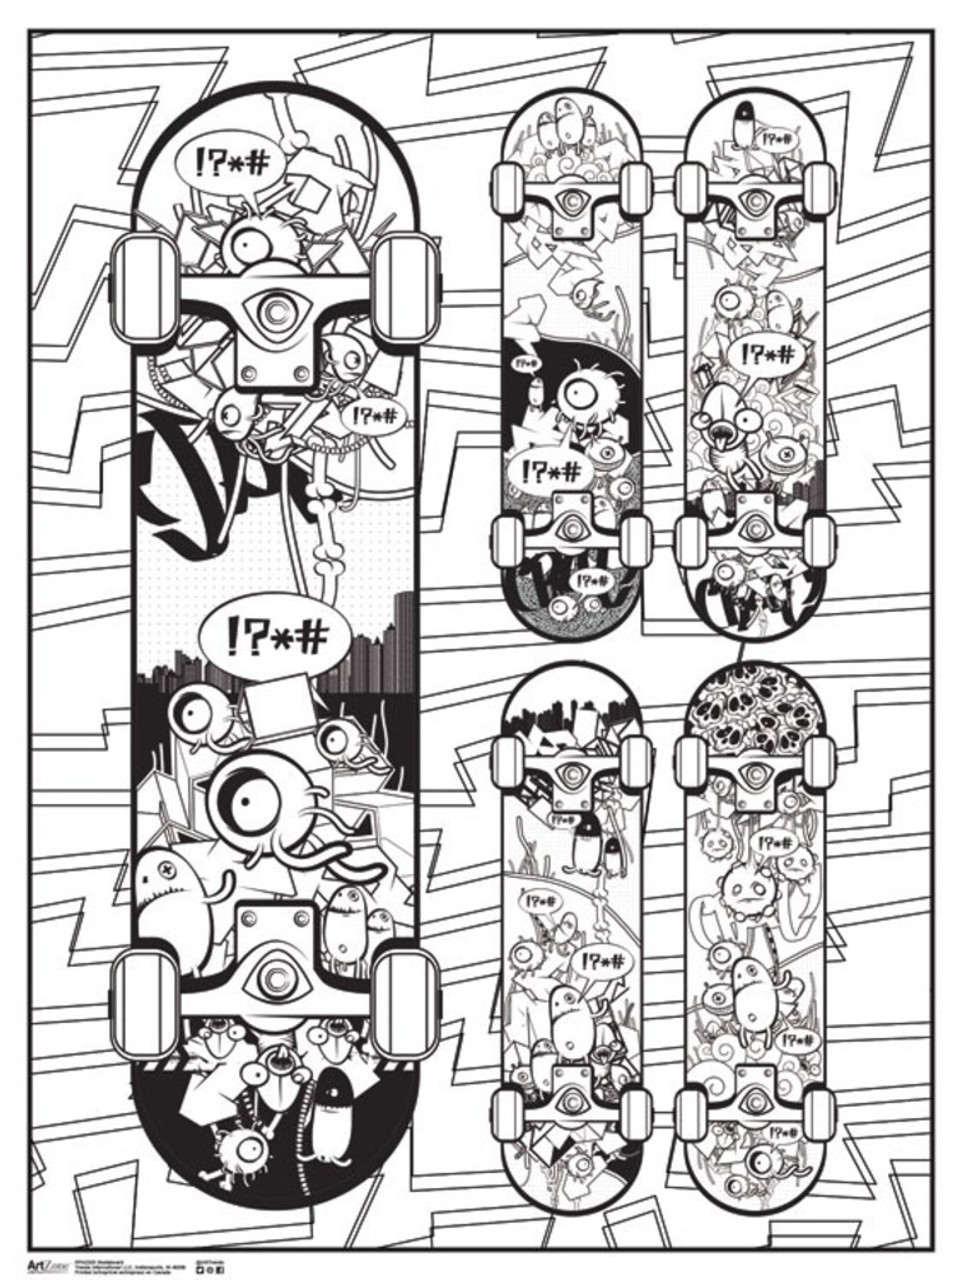 Skateboard Art Print Coloring Poster for Adults Kids Family Doodle Art  Poster18x24 inch - Poster Foundry